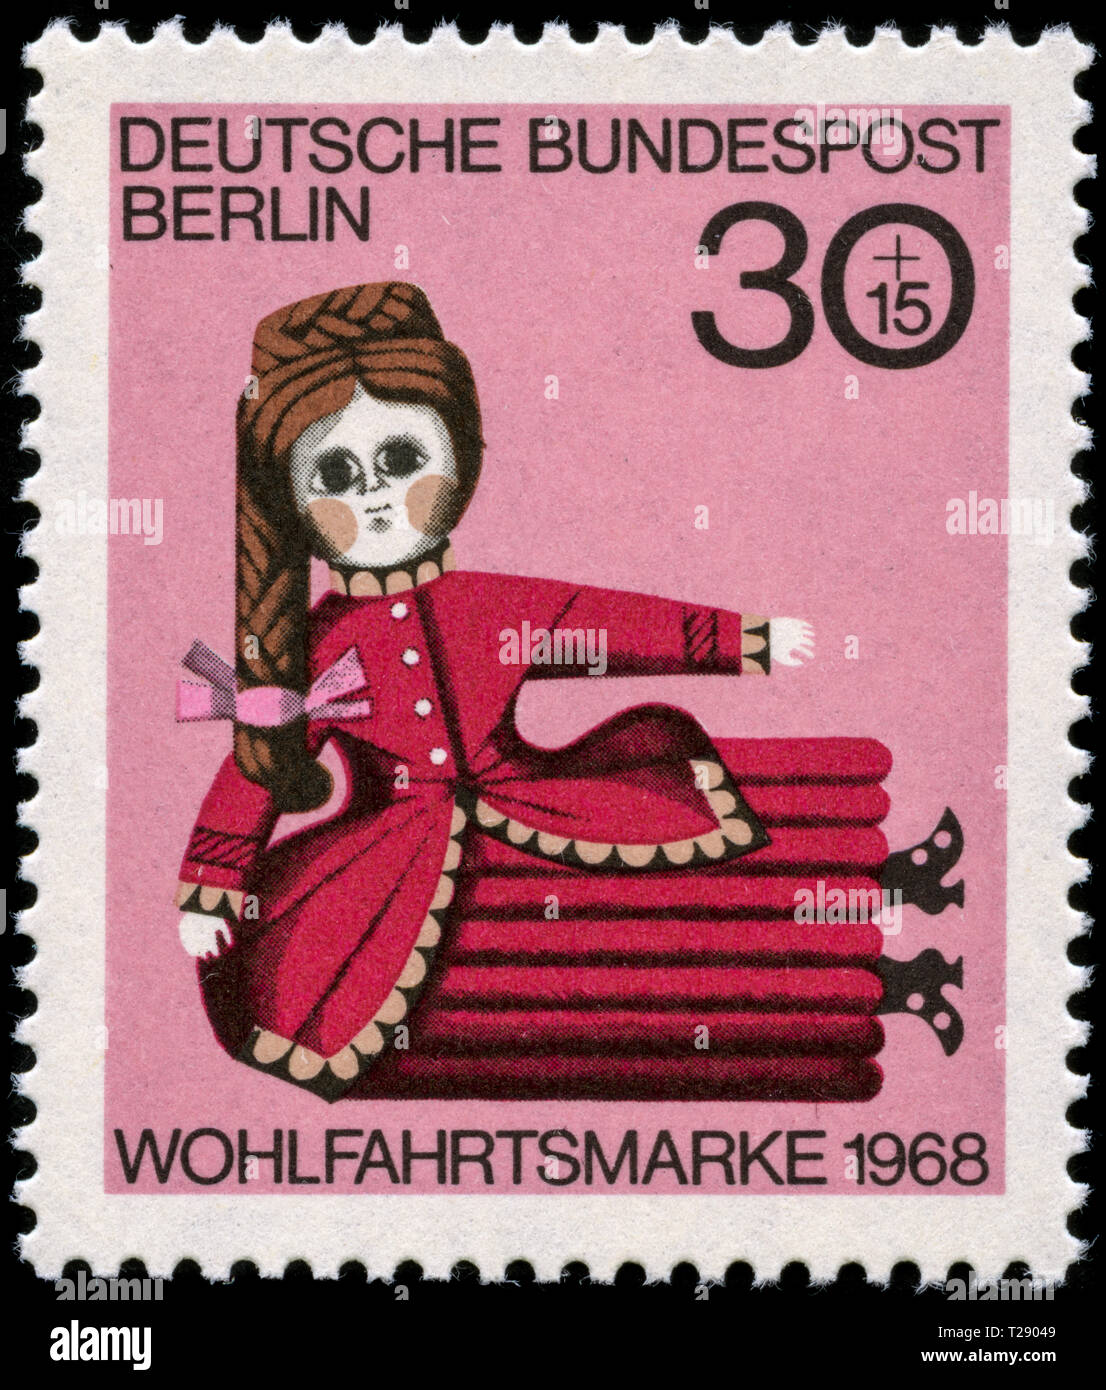 Postage stamps from Germany in the Welfare: Dolls series issued in 1968 Stock Photo